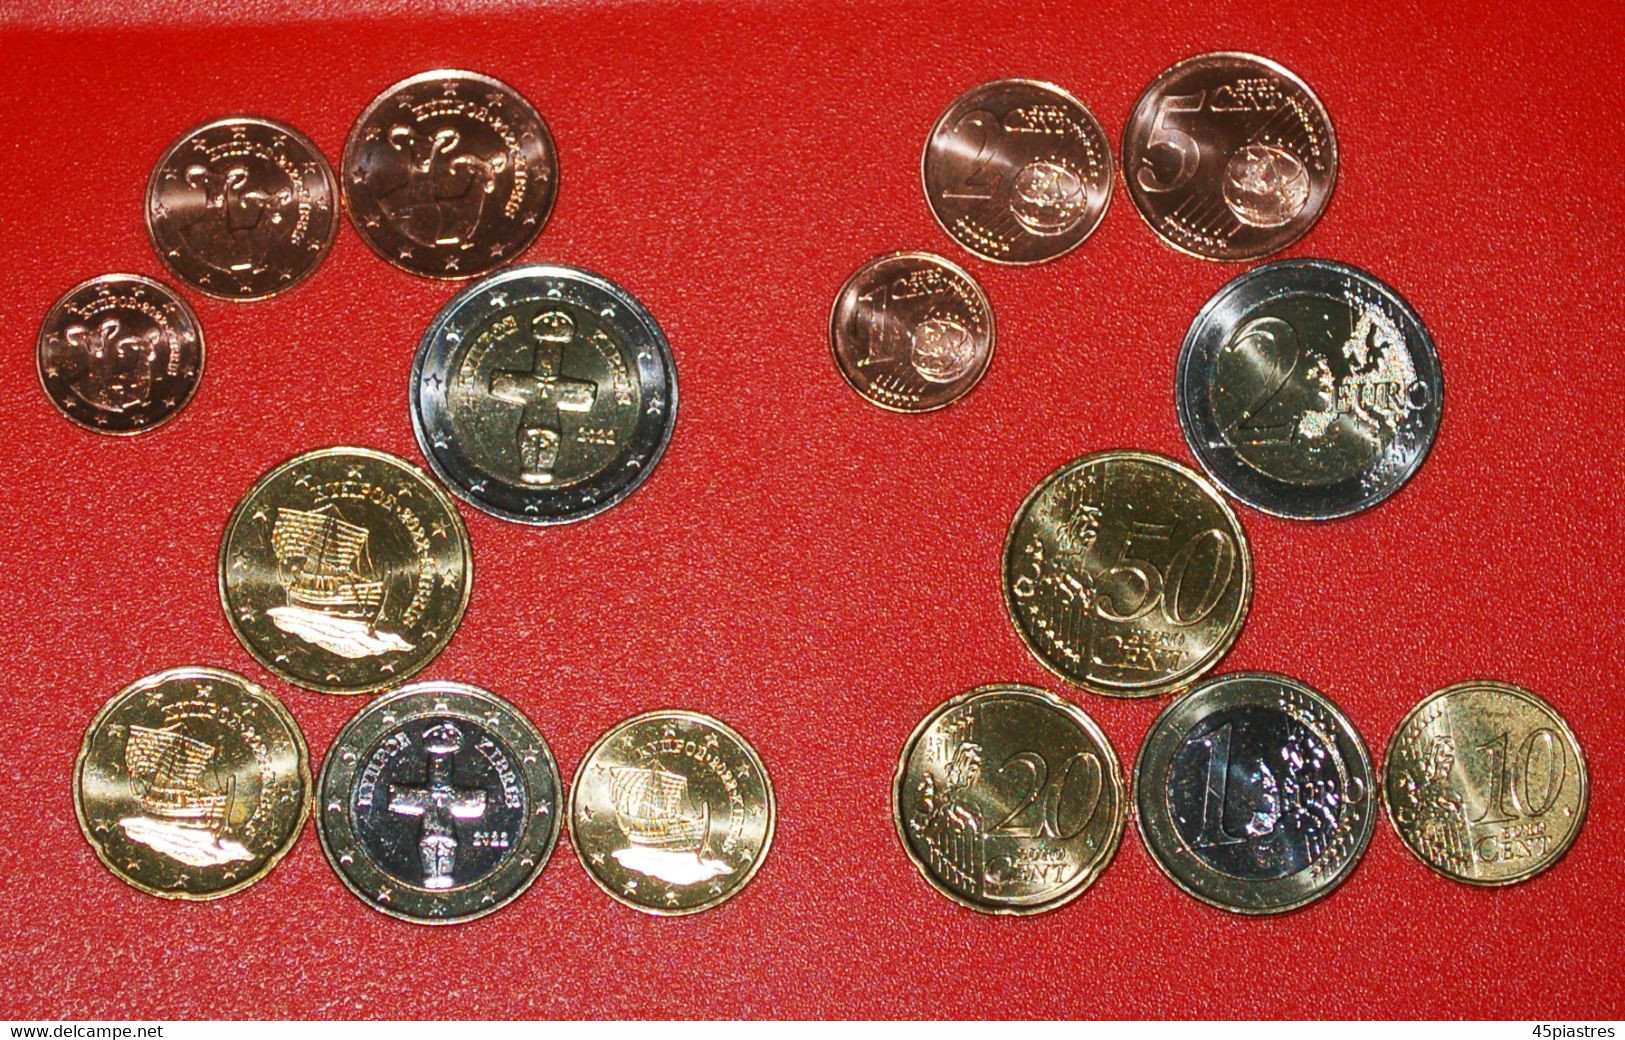 * GREECE: CYPRUS ★ EURO SET 8 COINS 2022 SHIPS AND ANIMALS UNC! LOW START ★ NO RESERVE! - Cyprus